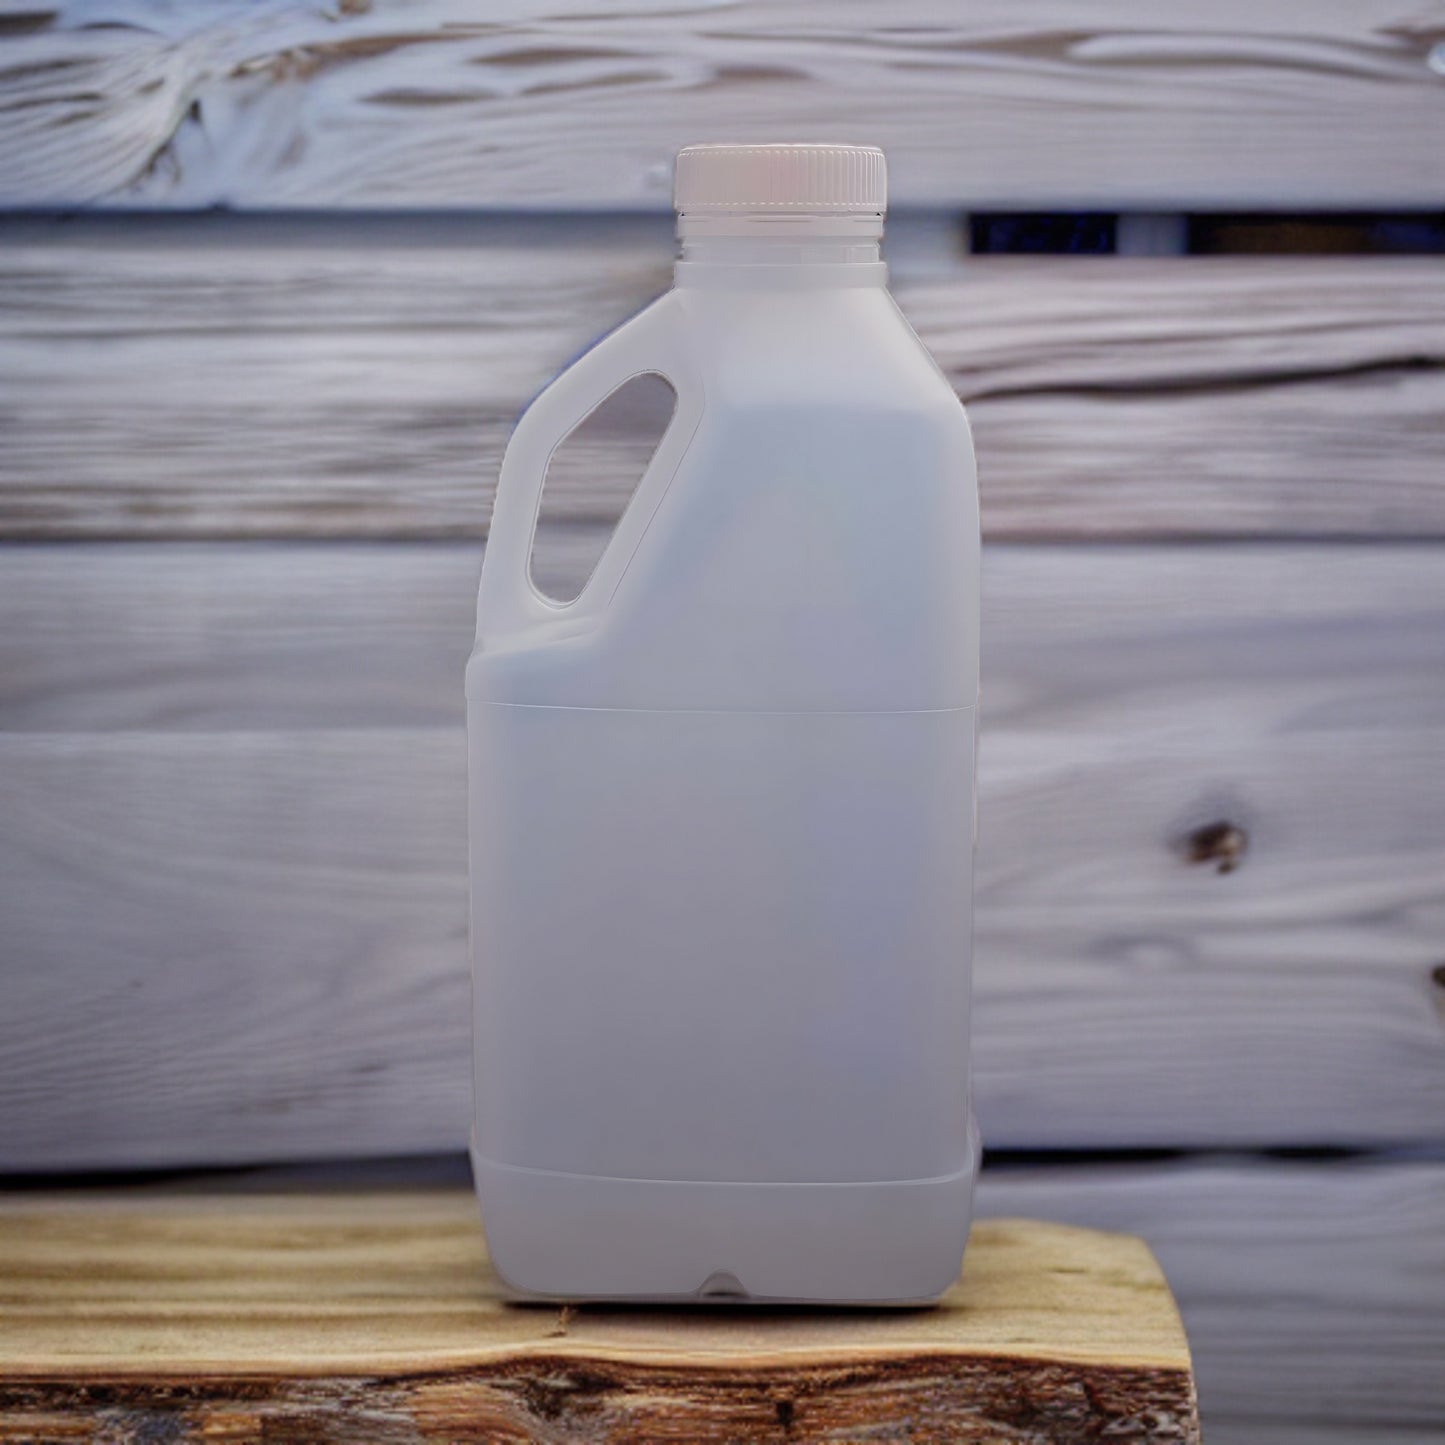 1Litre(1000ml)Plastic Milk Bottle with Handle and White Cap 